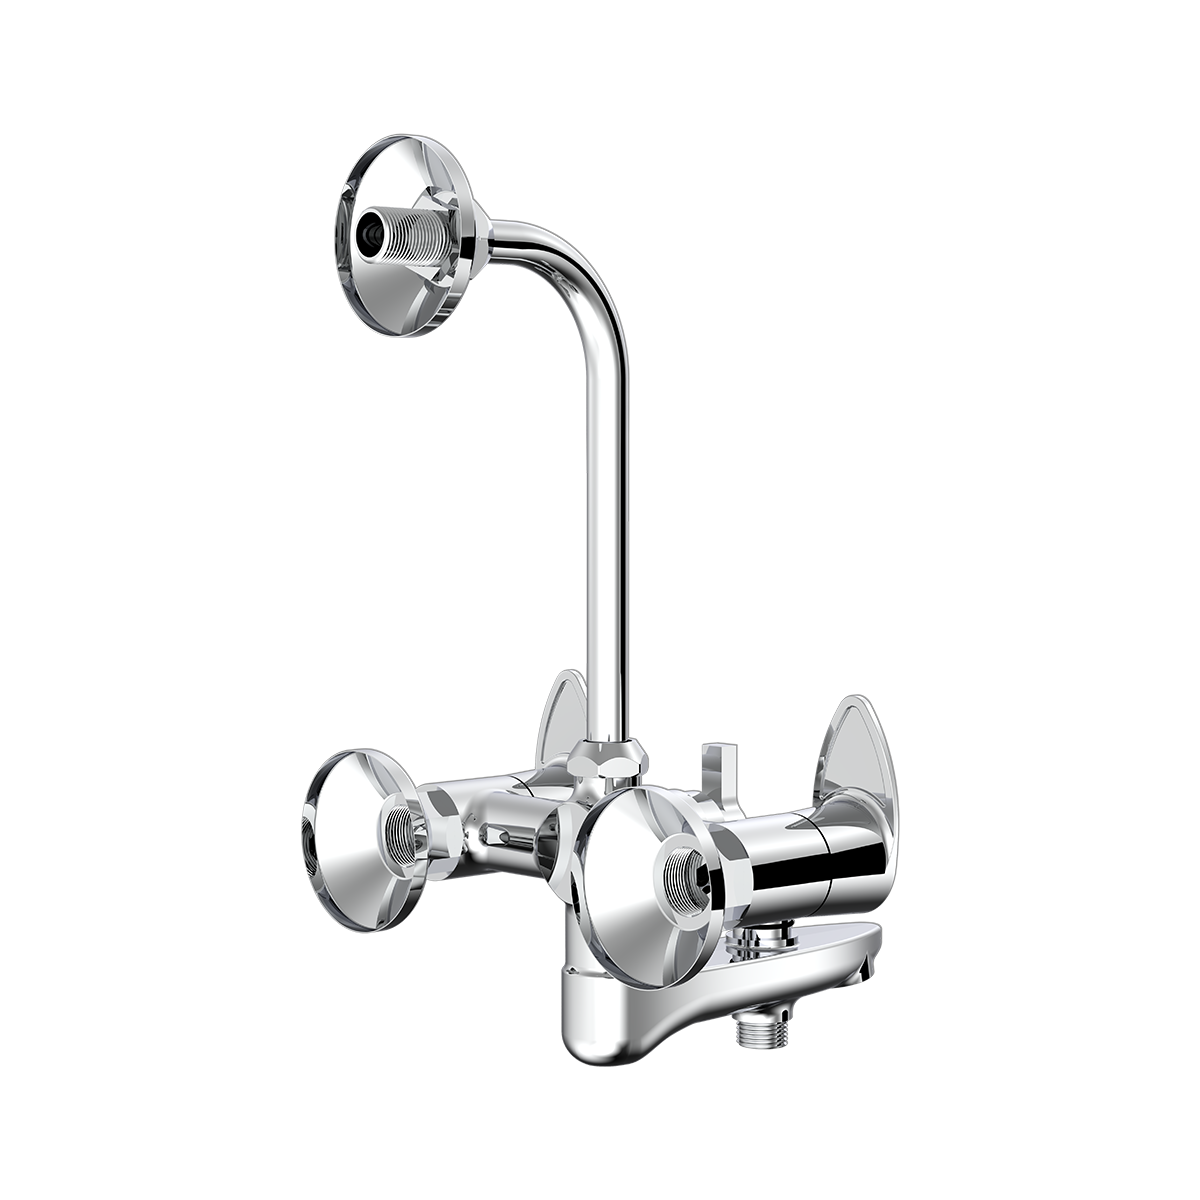 3 In 1 Wall Mixer With Provision For Both Overhead